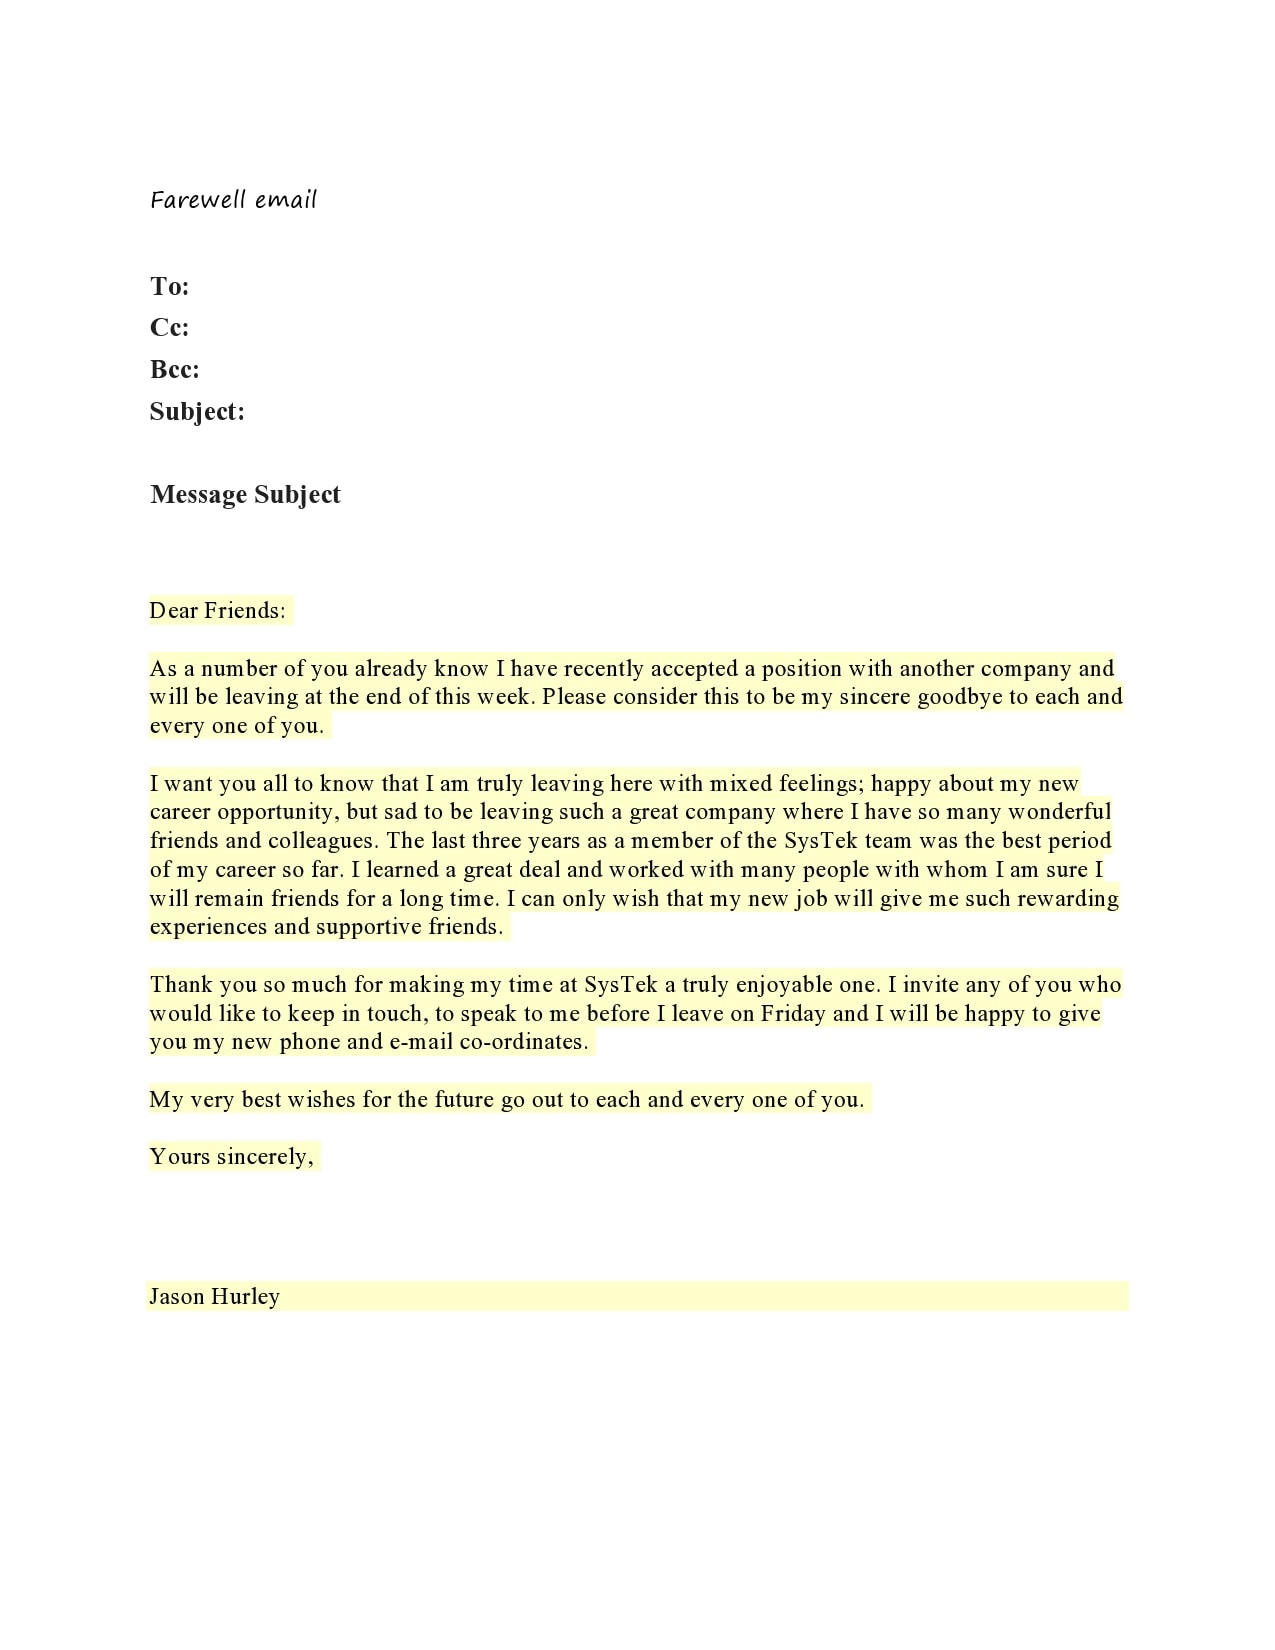 Best wishes email to colleague who is leaving the company 28 Perfect Farewell Letters To Boss Or Colleagues Templatearchive